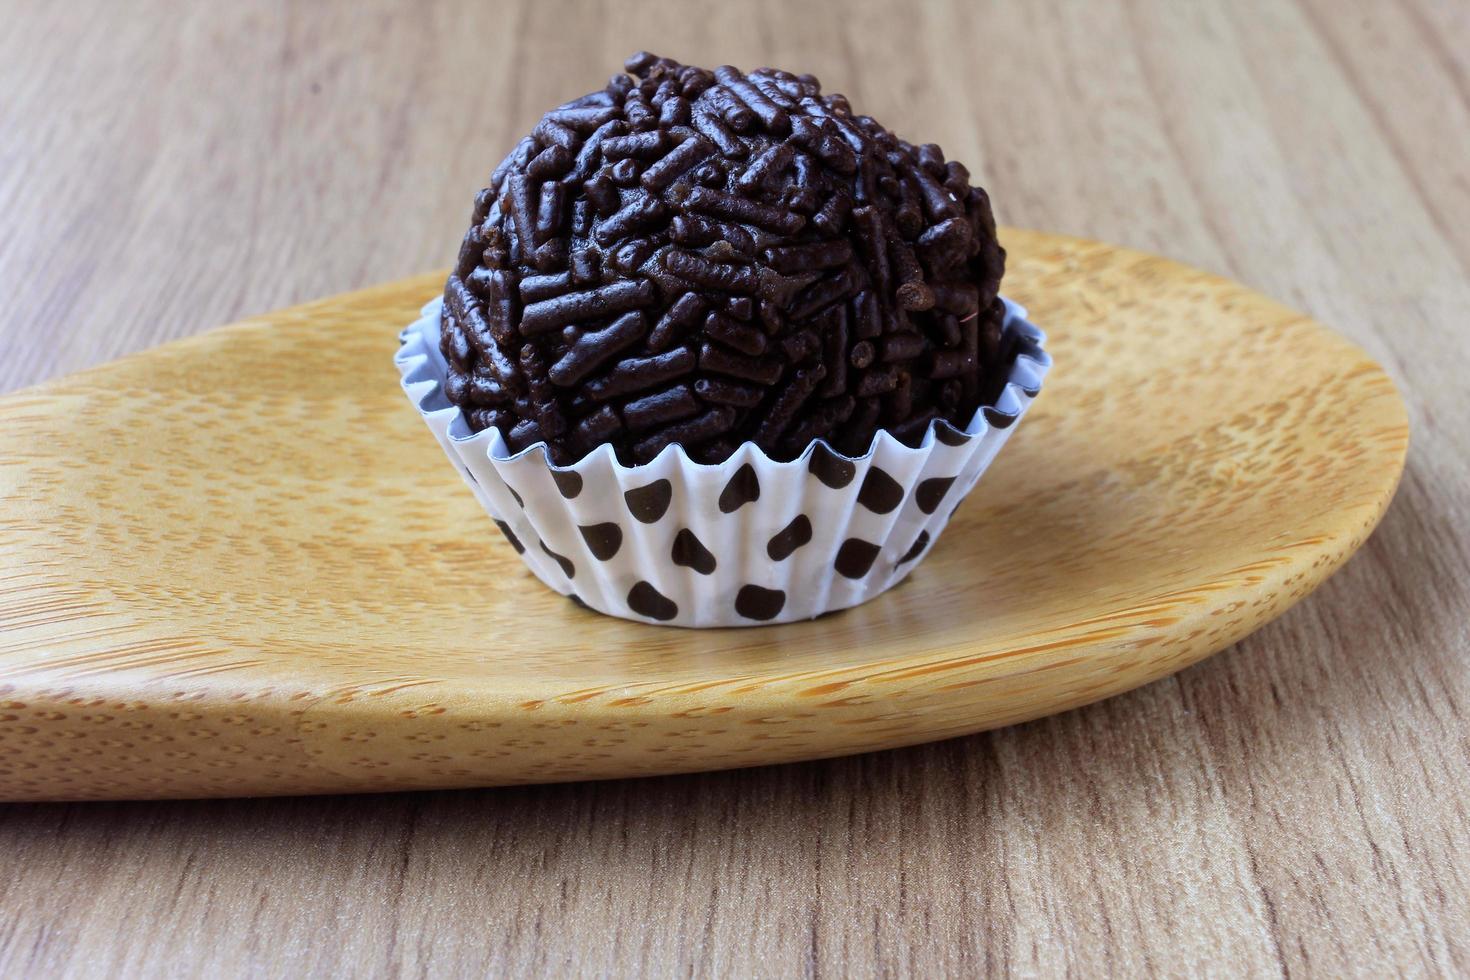 brigadeiro, brigadier, sweet chocolate typical of Brazilian cuisine covered with particles, in a wooden background. photo